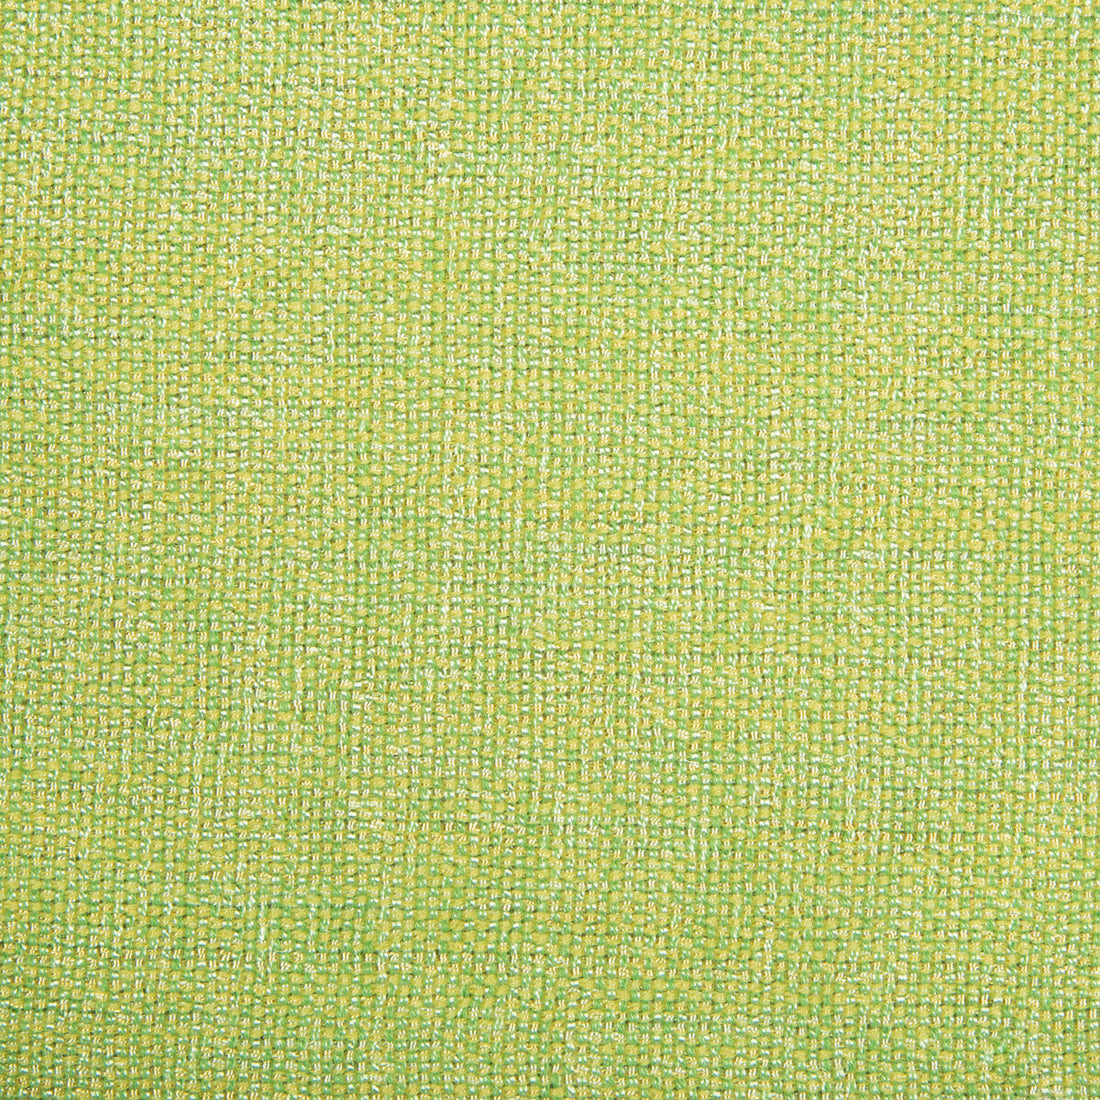 Kravet Contract fabric in 4458-1423 color - pattern 4458.1423.0 - by Kravet Contract